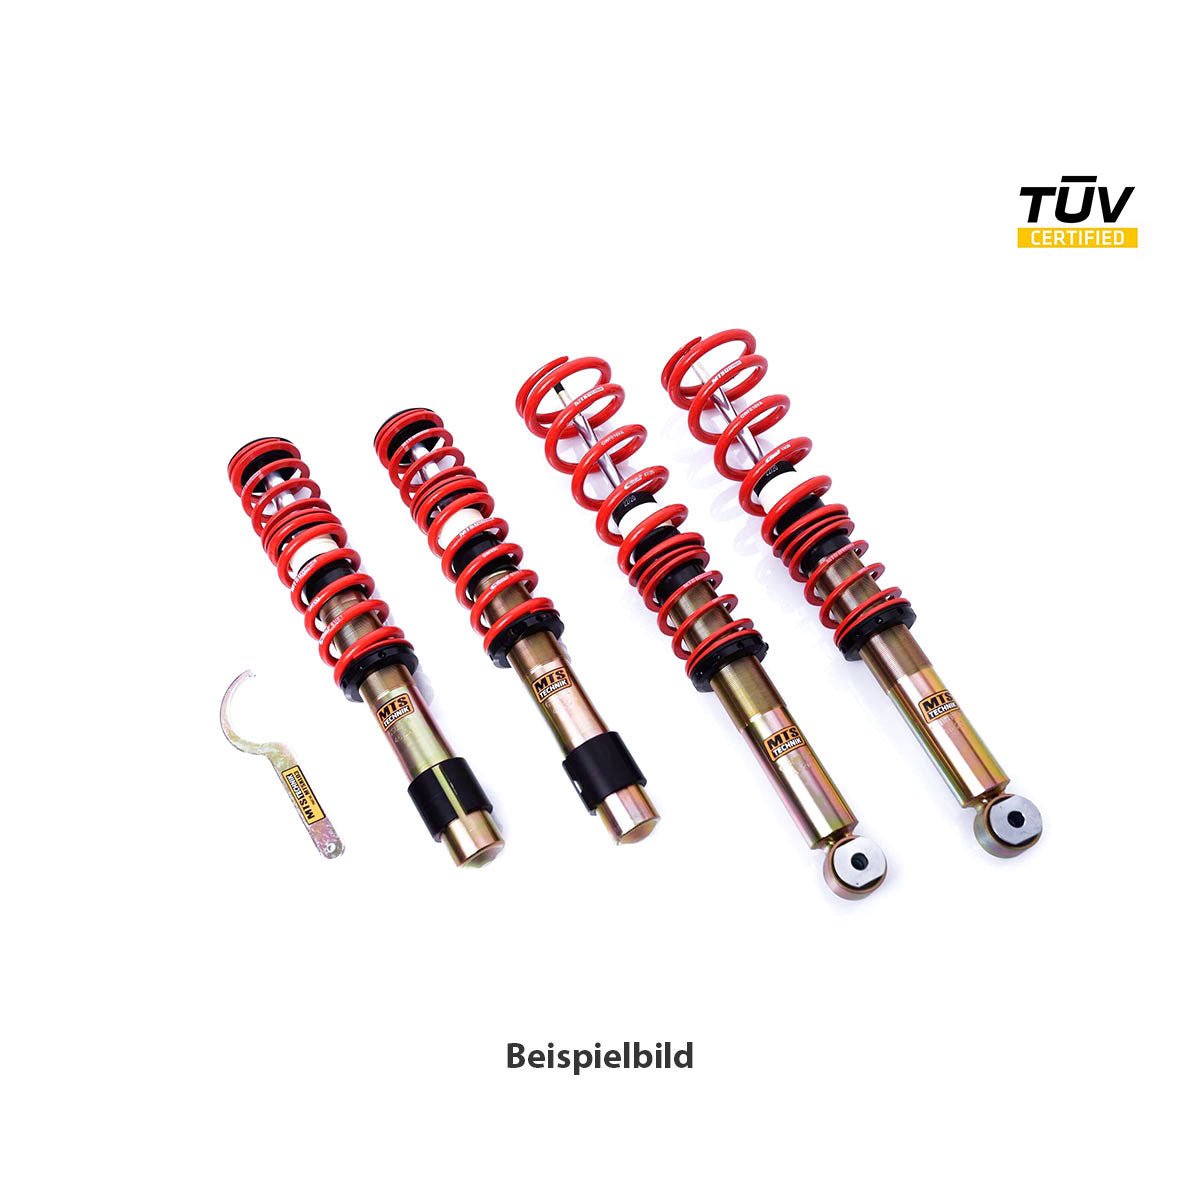 MTS TECHNIK coilover kit STREET BMW E34 Touring (with TÜV) - PARTS33 GmbH